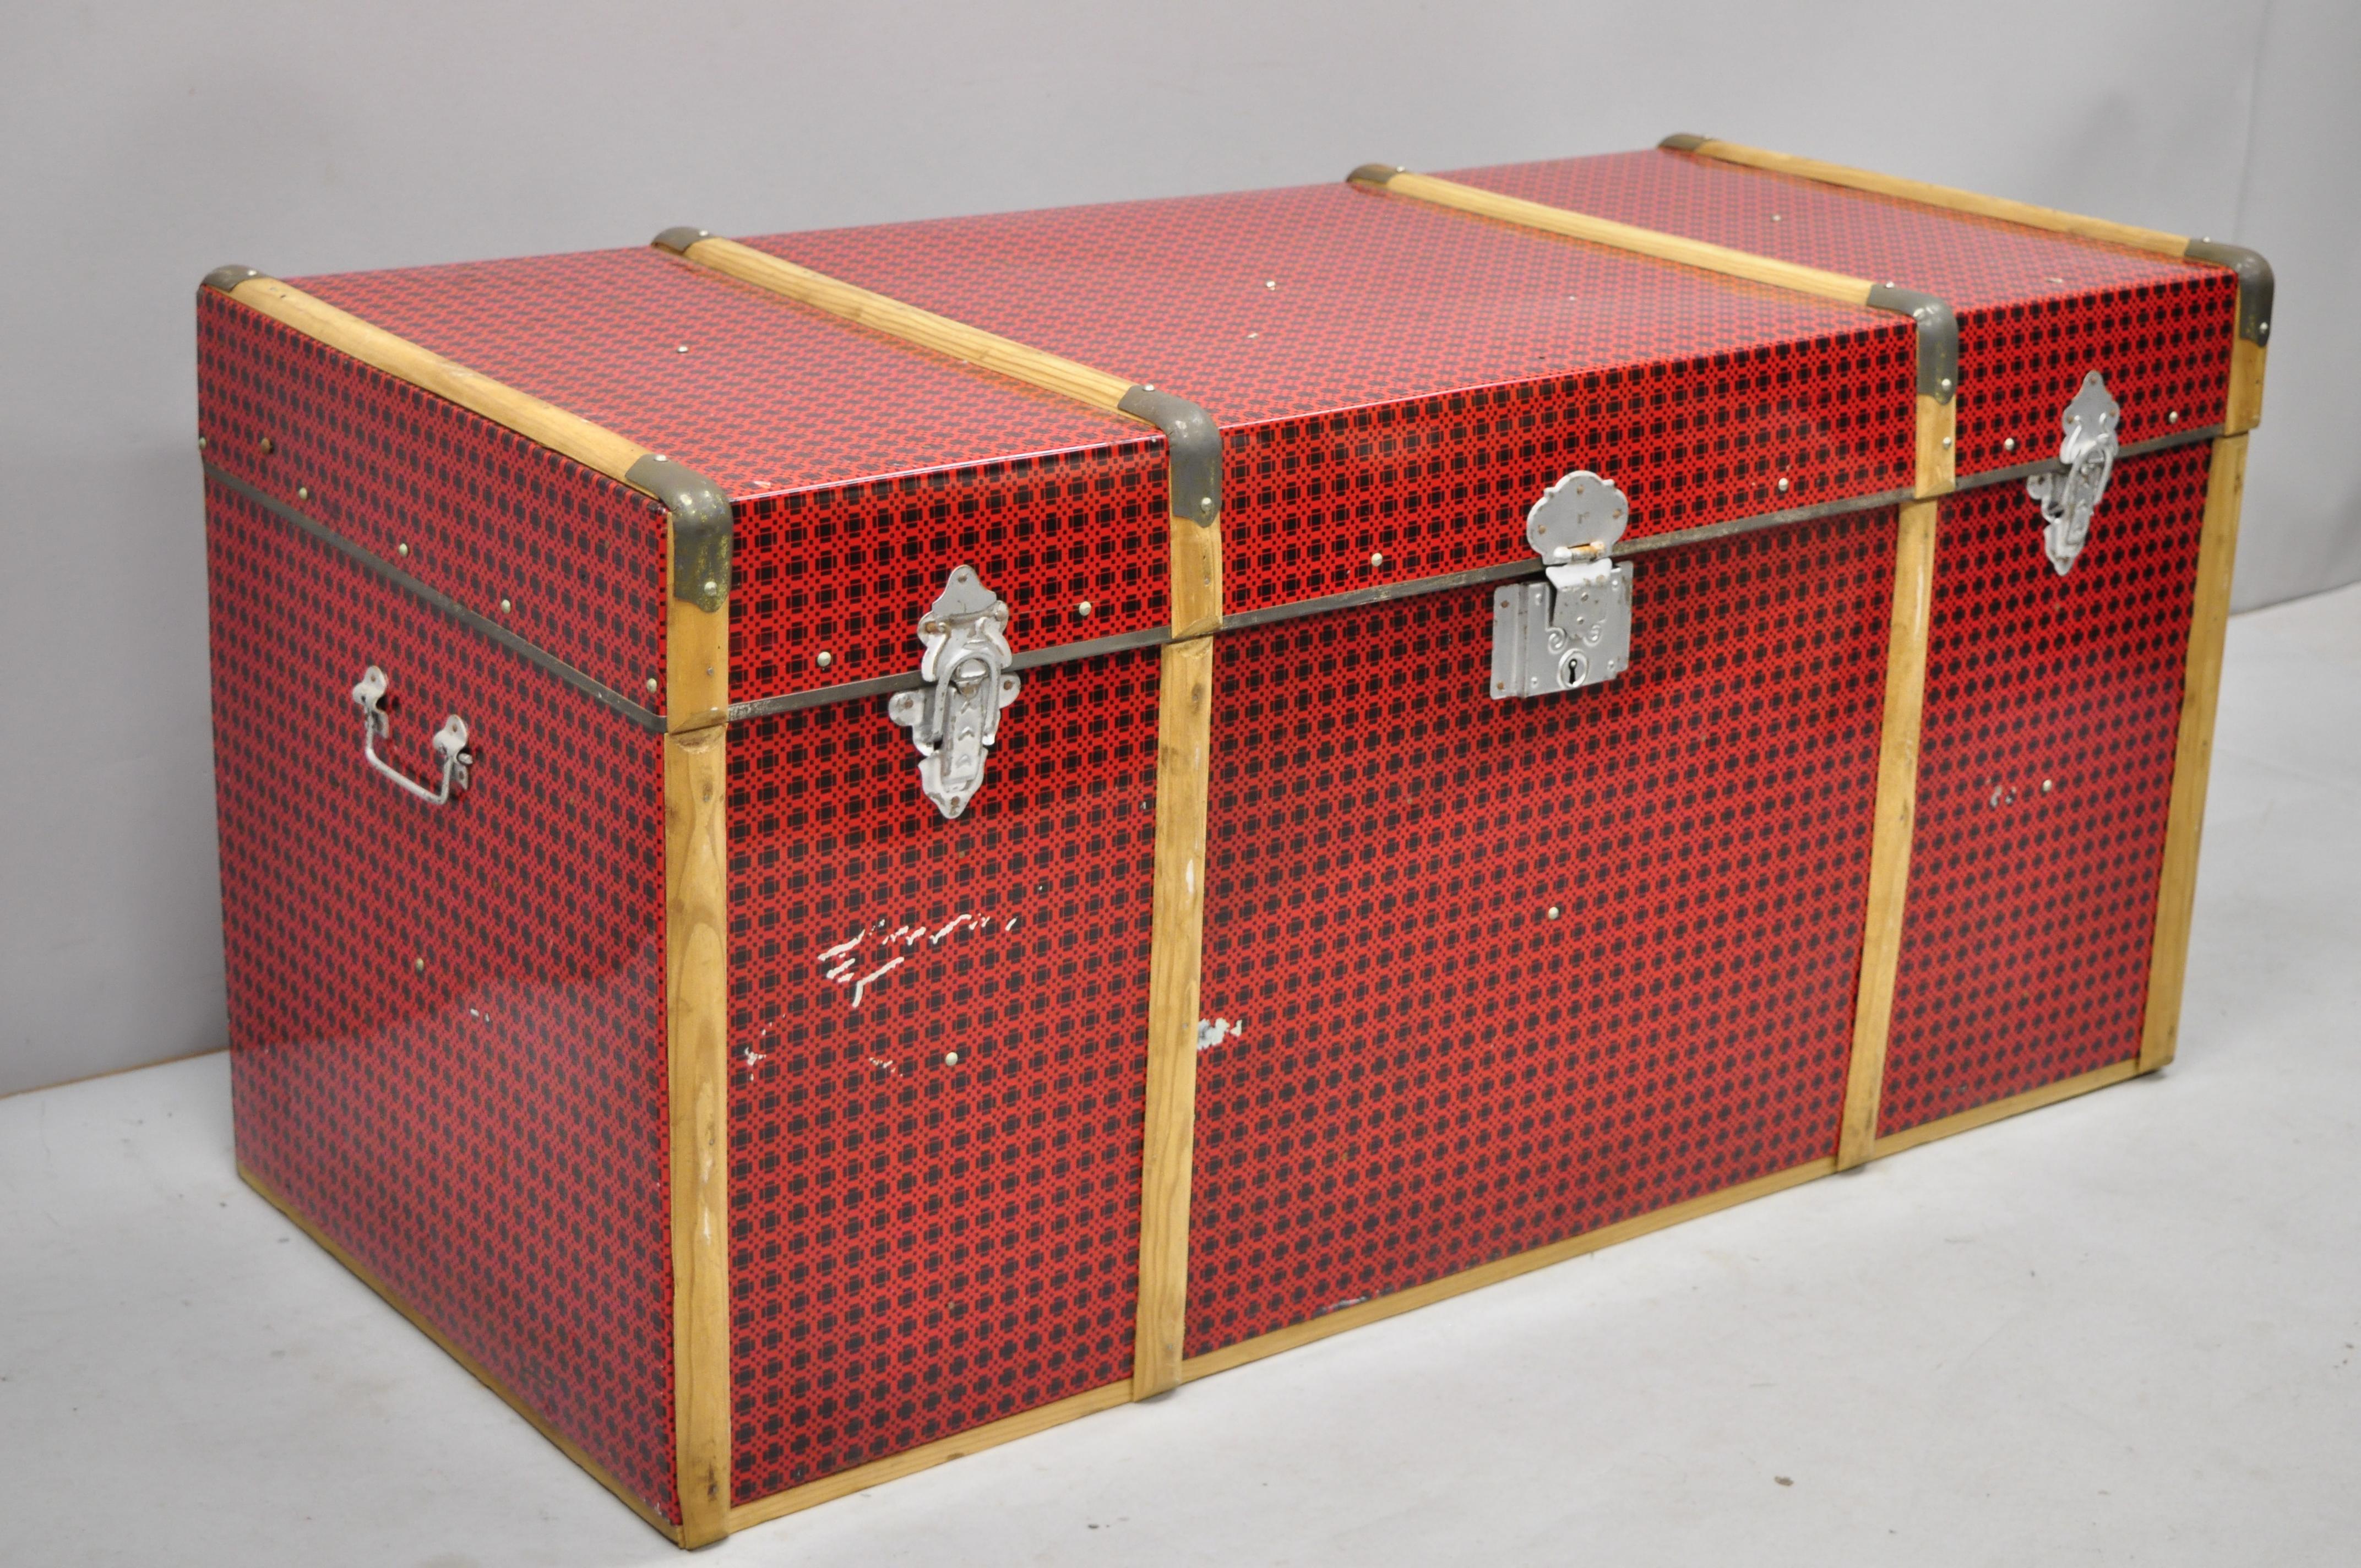 Vintage wood tin metal wrapped red faux cane wicker chest trunk box. Item includes red 